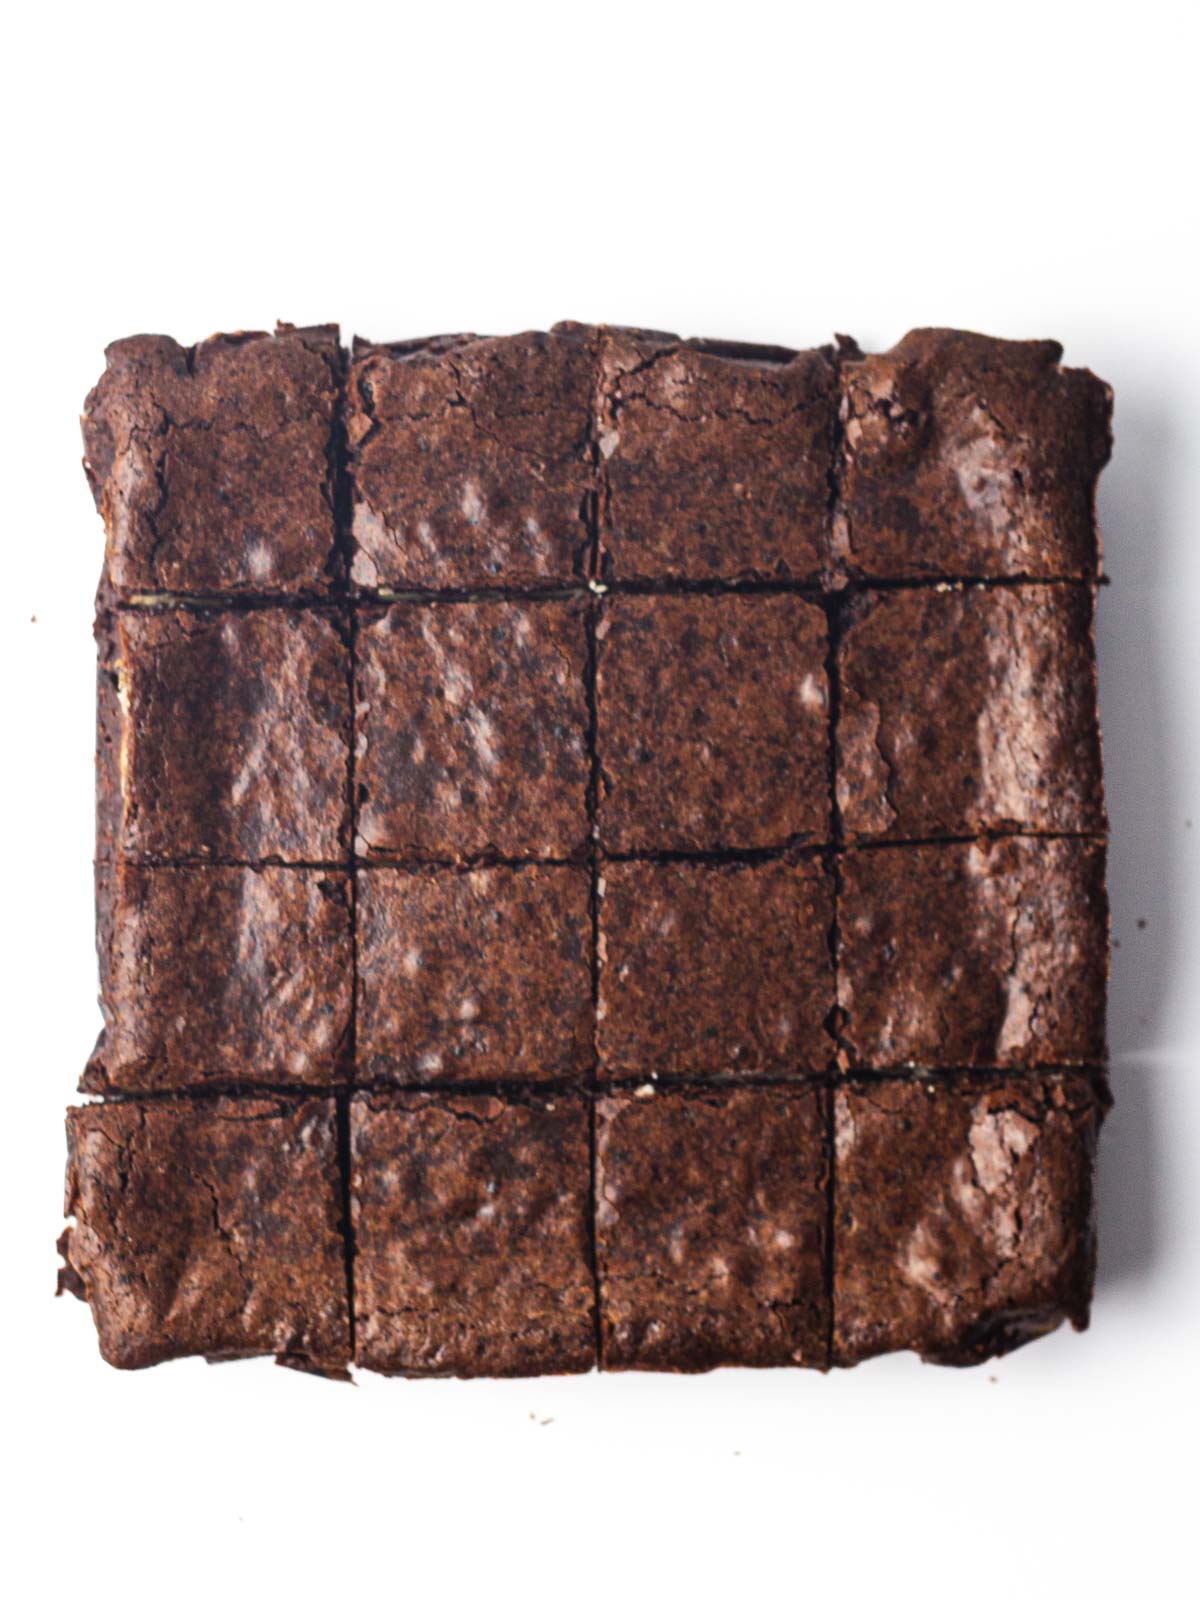 A batch of brownies cut into squares on a white surface.